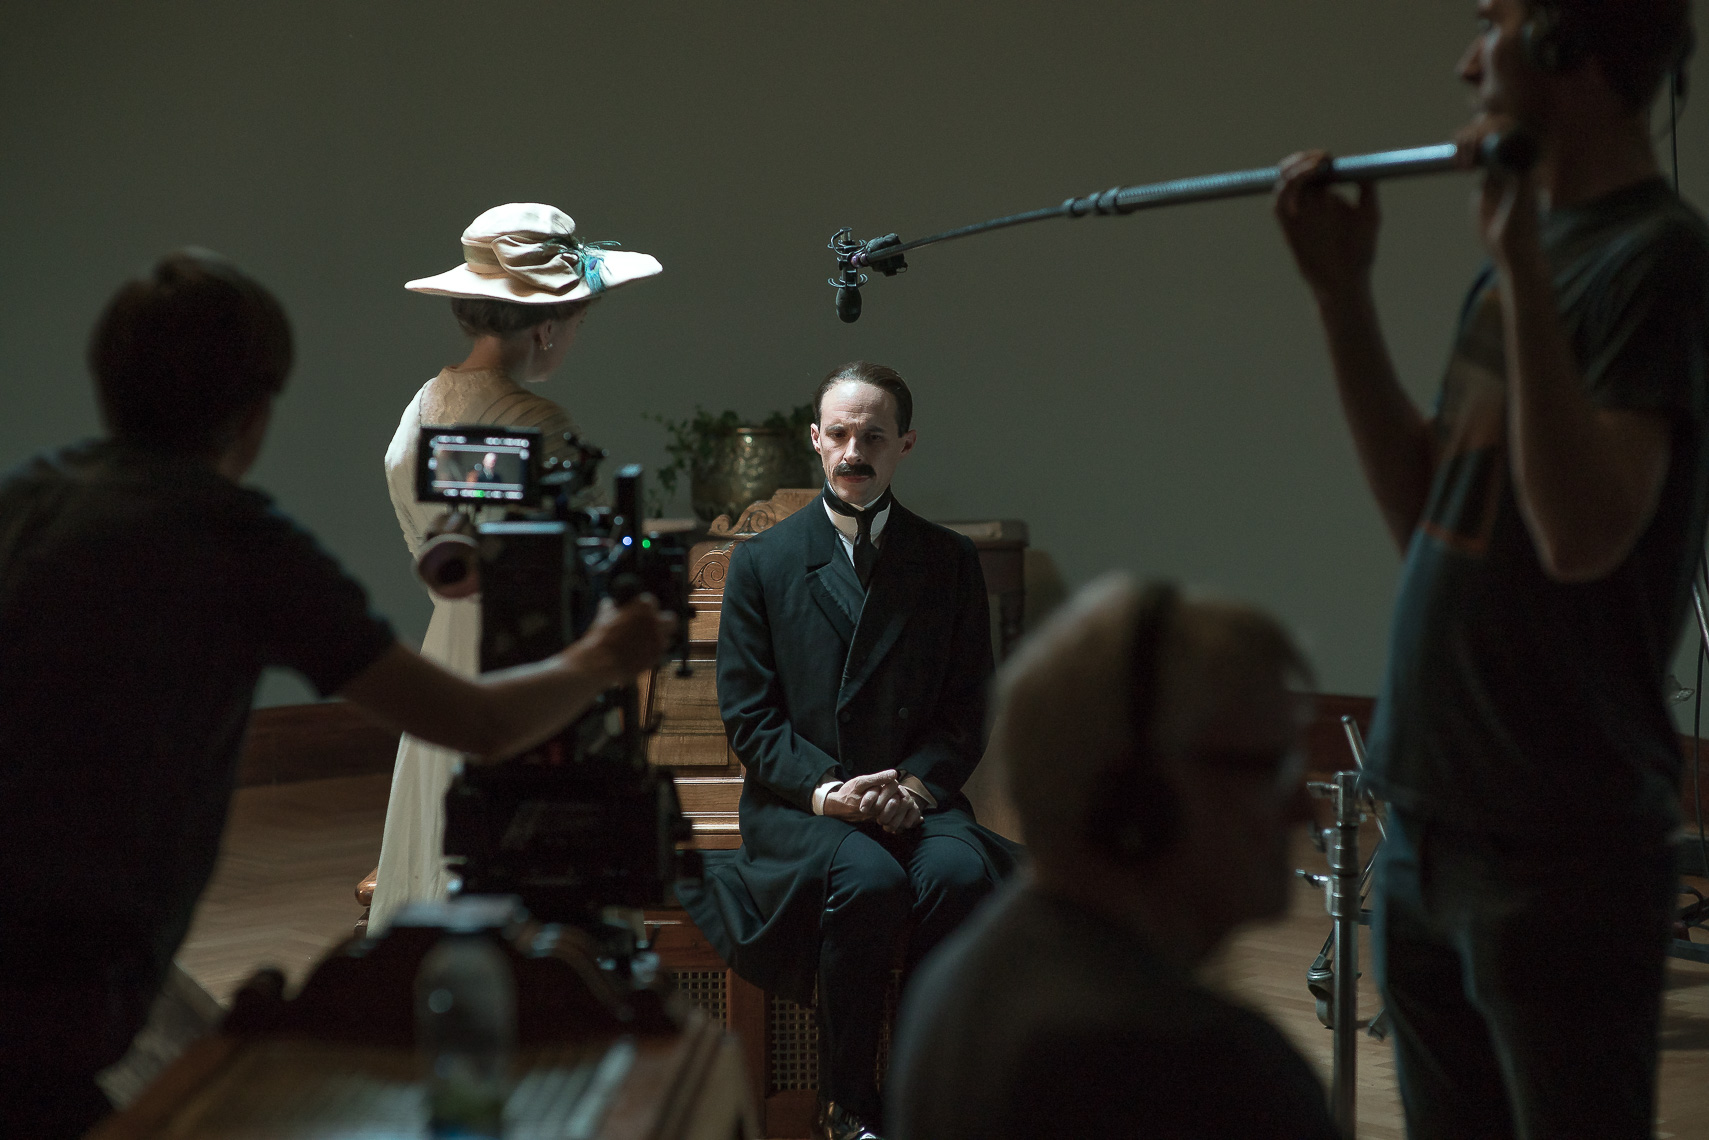 Lesley Conroy as Ms Sarah Cecilia Harrison and Tom Vaughan-Lawlor as Hugh Lane surrounded by film crew.